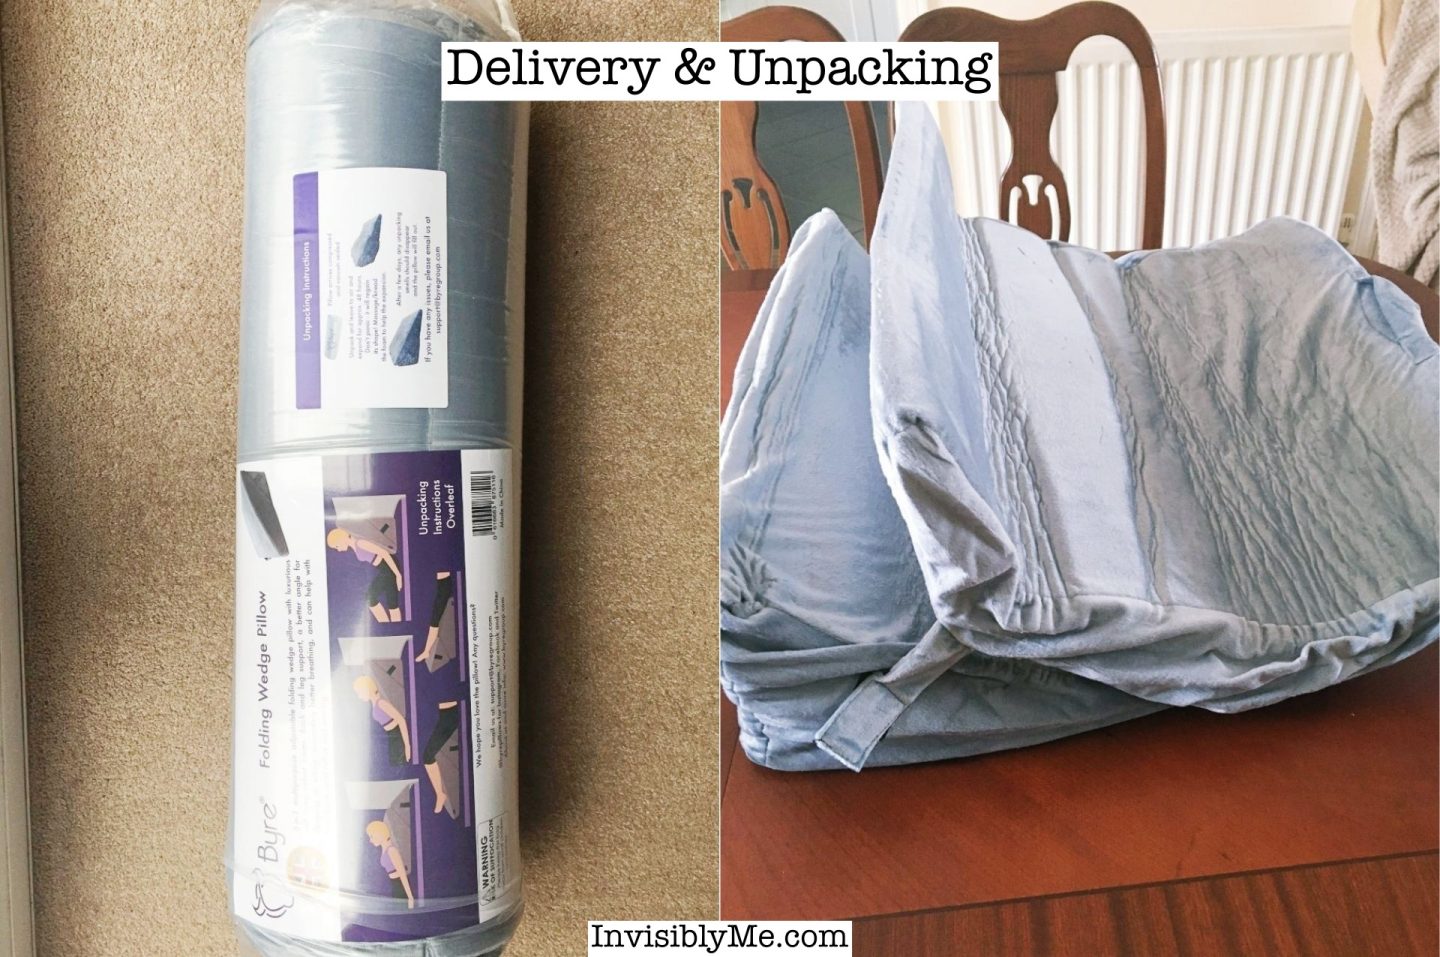 A collage of two photos. To the left is the bed wedge when it was first delivered, rolled up into a tube shape and shrink wrapped. To the right is the bed wedge unpacked on the dining table after being opened. It looks shrunken and wrinkled, before it's left for 24 to 48 hours to expand.